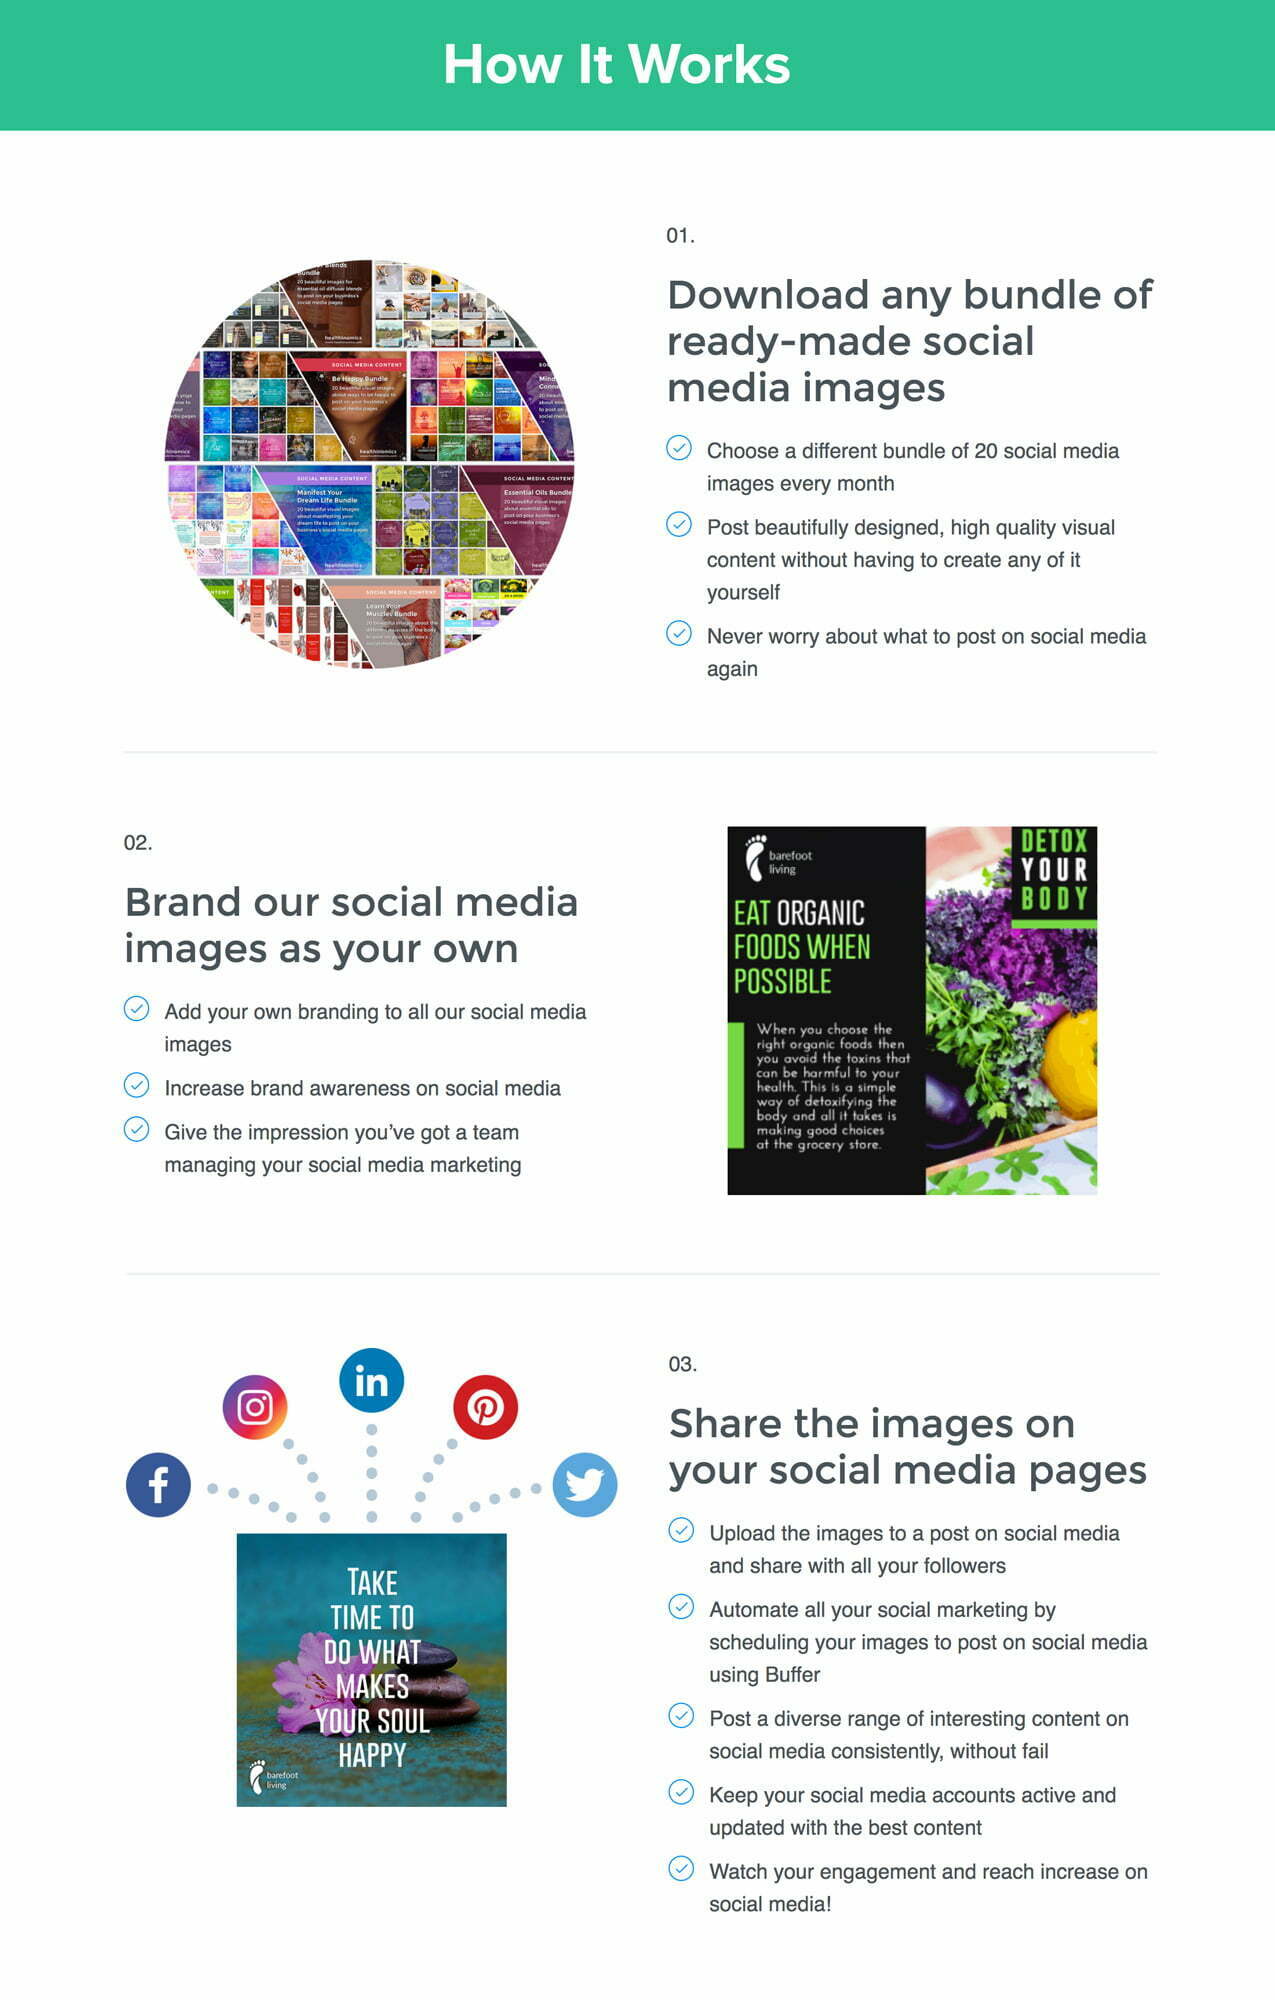 Healthinomics | Beautiful Ready-Made Social Media Images for Health & Wellness Business Owners